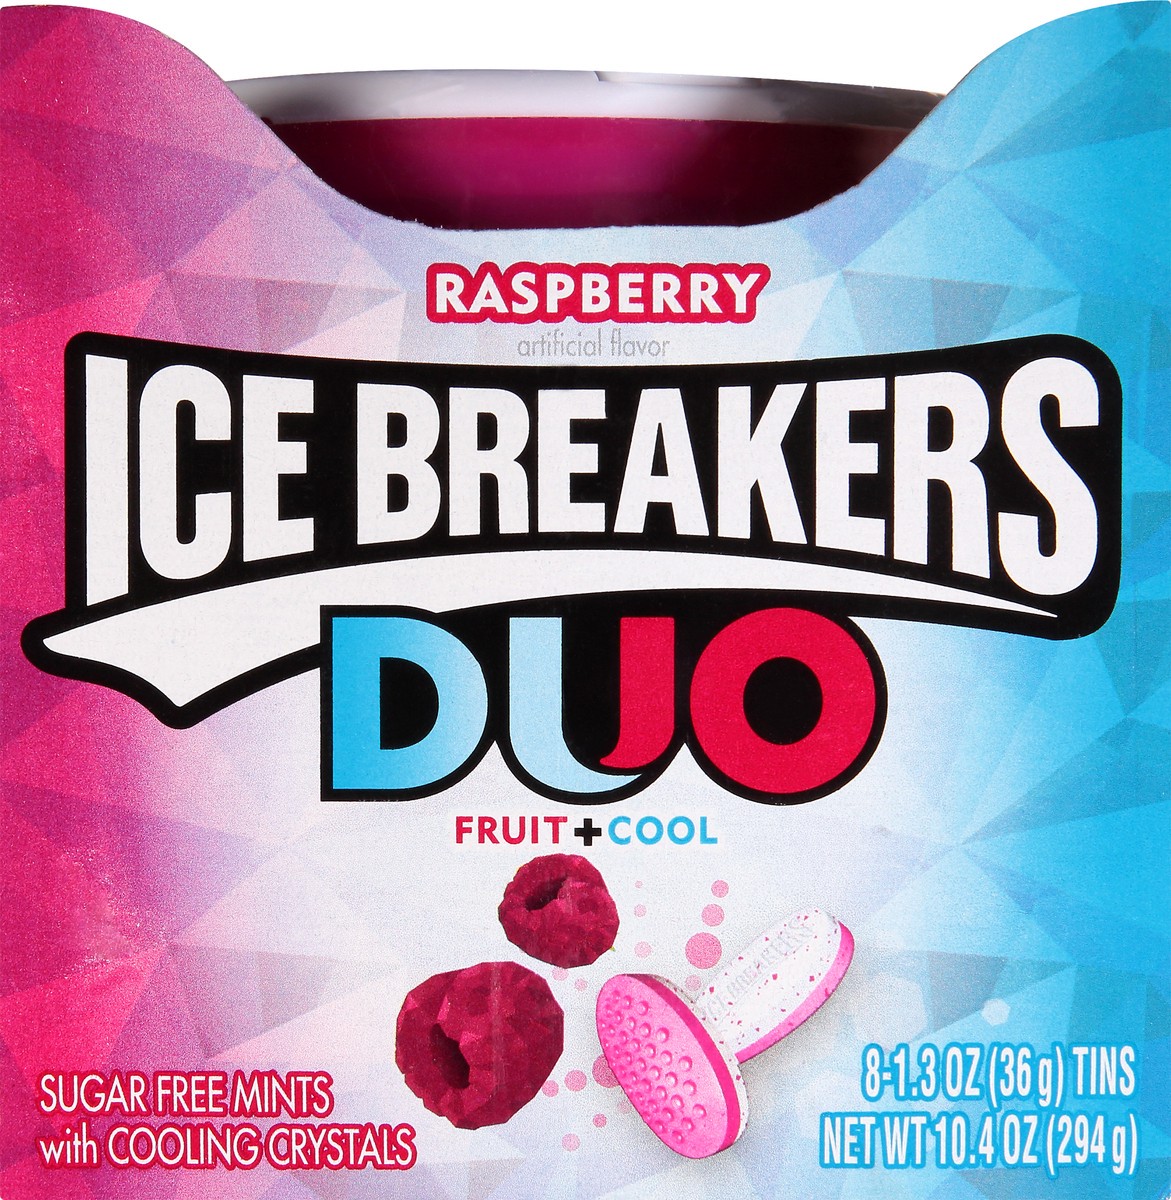 slide 6 of 10, Ice Breakers Duo Fruit Plus Cool Raspberry Sugar Free Mints Tins, 1.3 oz (8 Count), 1.3 oz